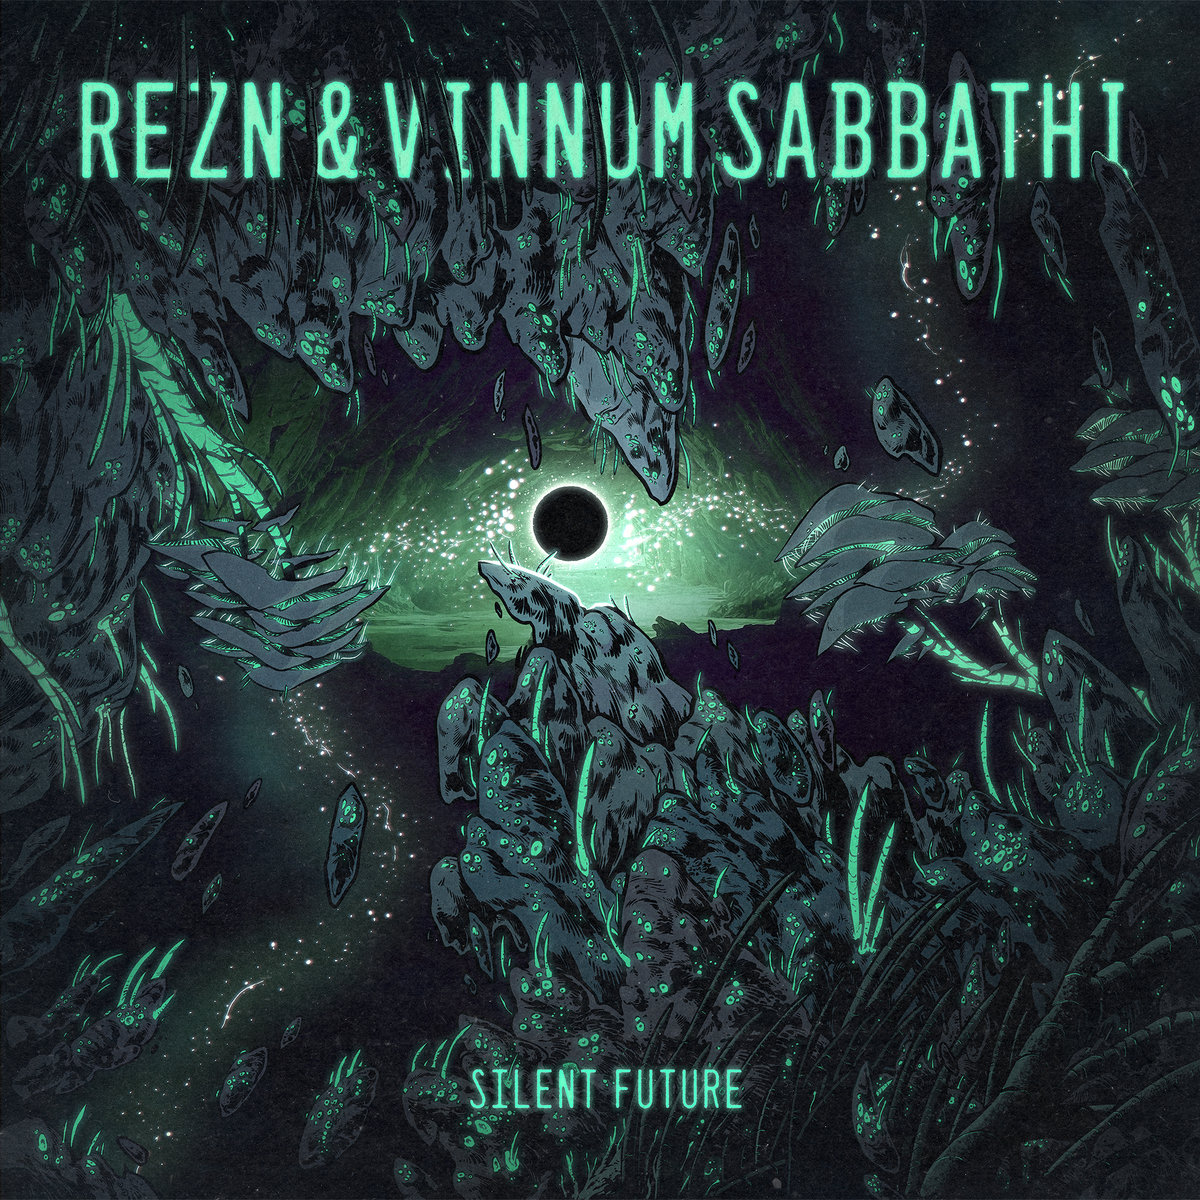 Check Out the New Single ‘Hypersurreal’ by Heavy Psych Rockers REZN and Vinnum Sabbathi